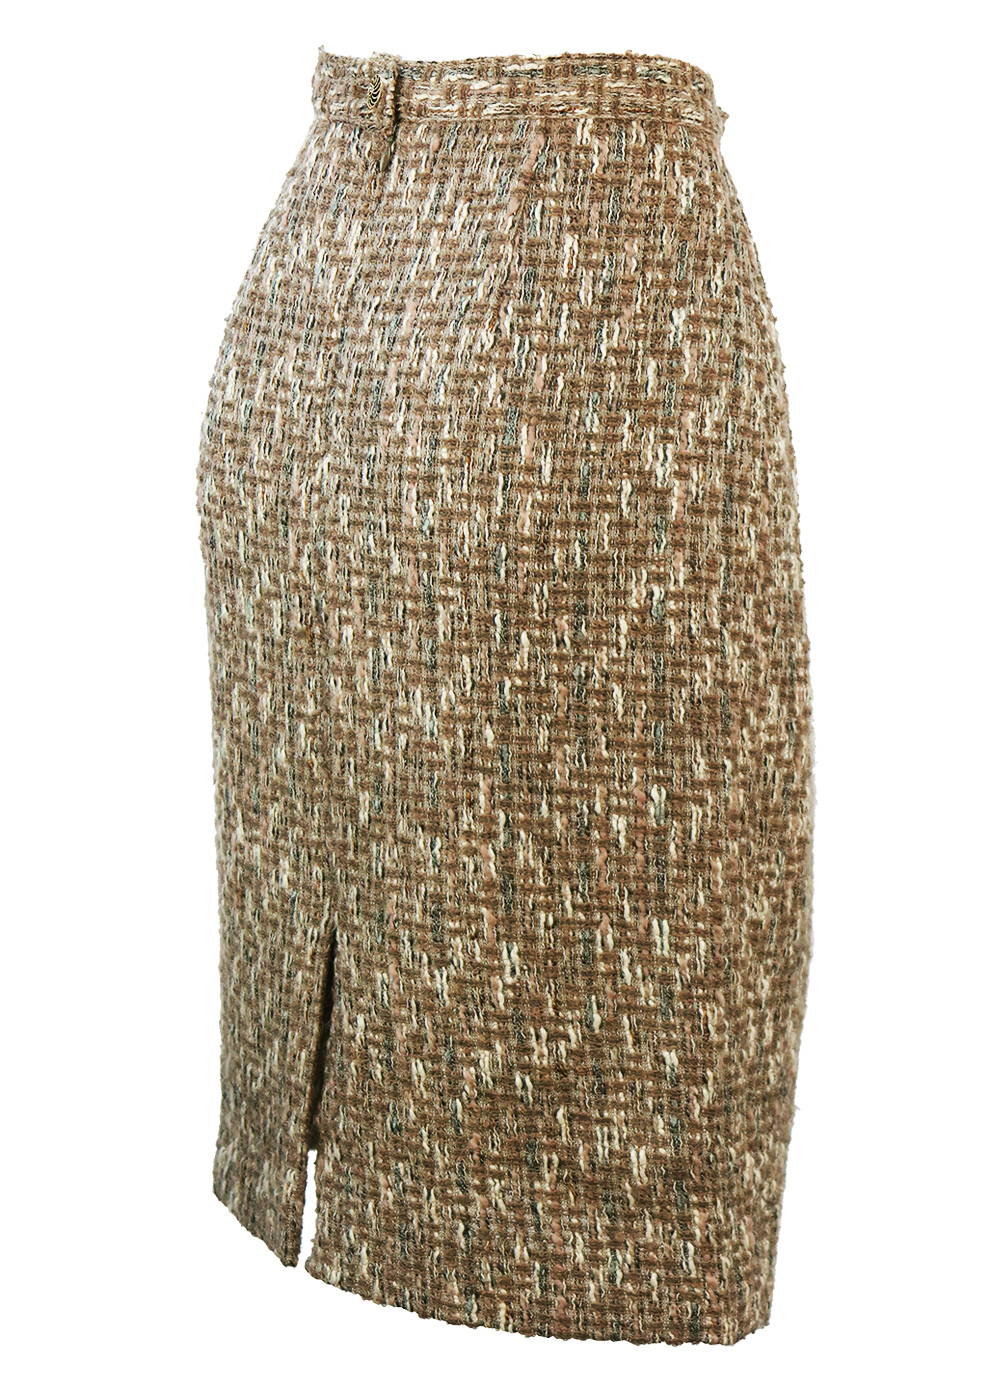 Beige Tweed Pencil Skirt with Dusty Pink, Cream & Soft Blue Colour ...